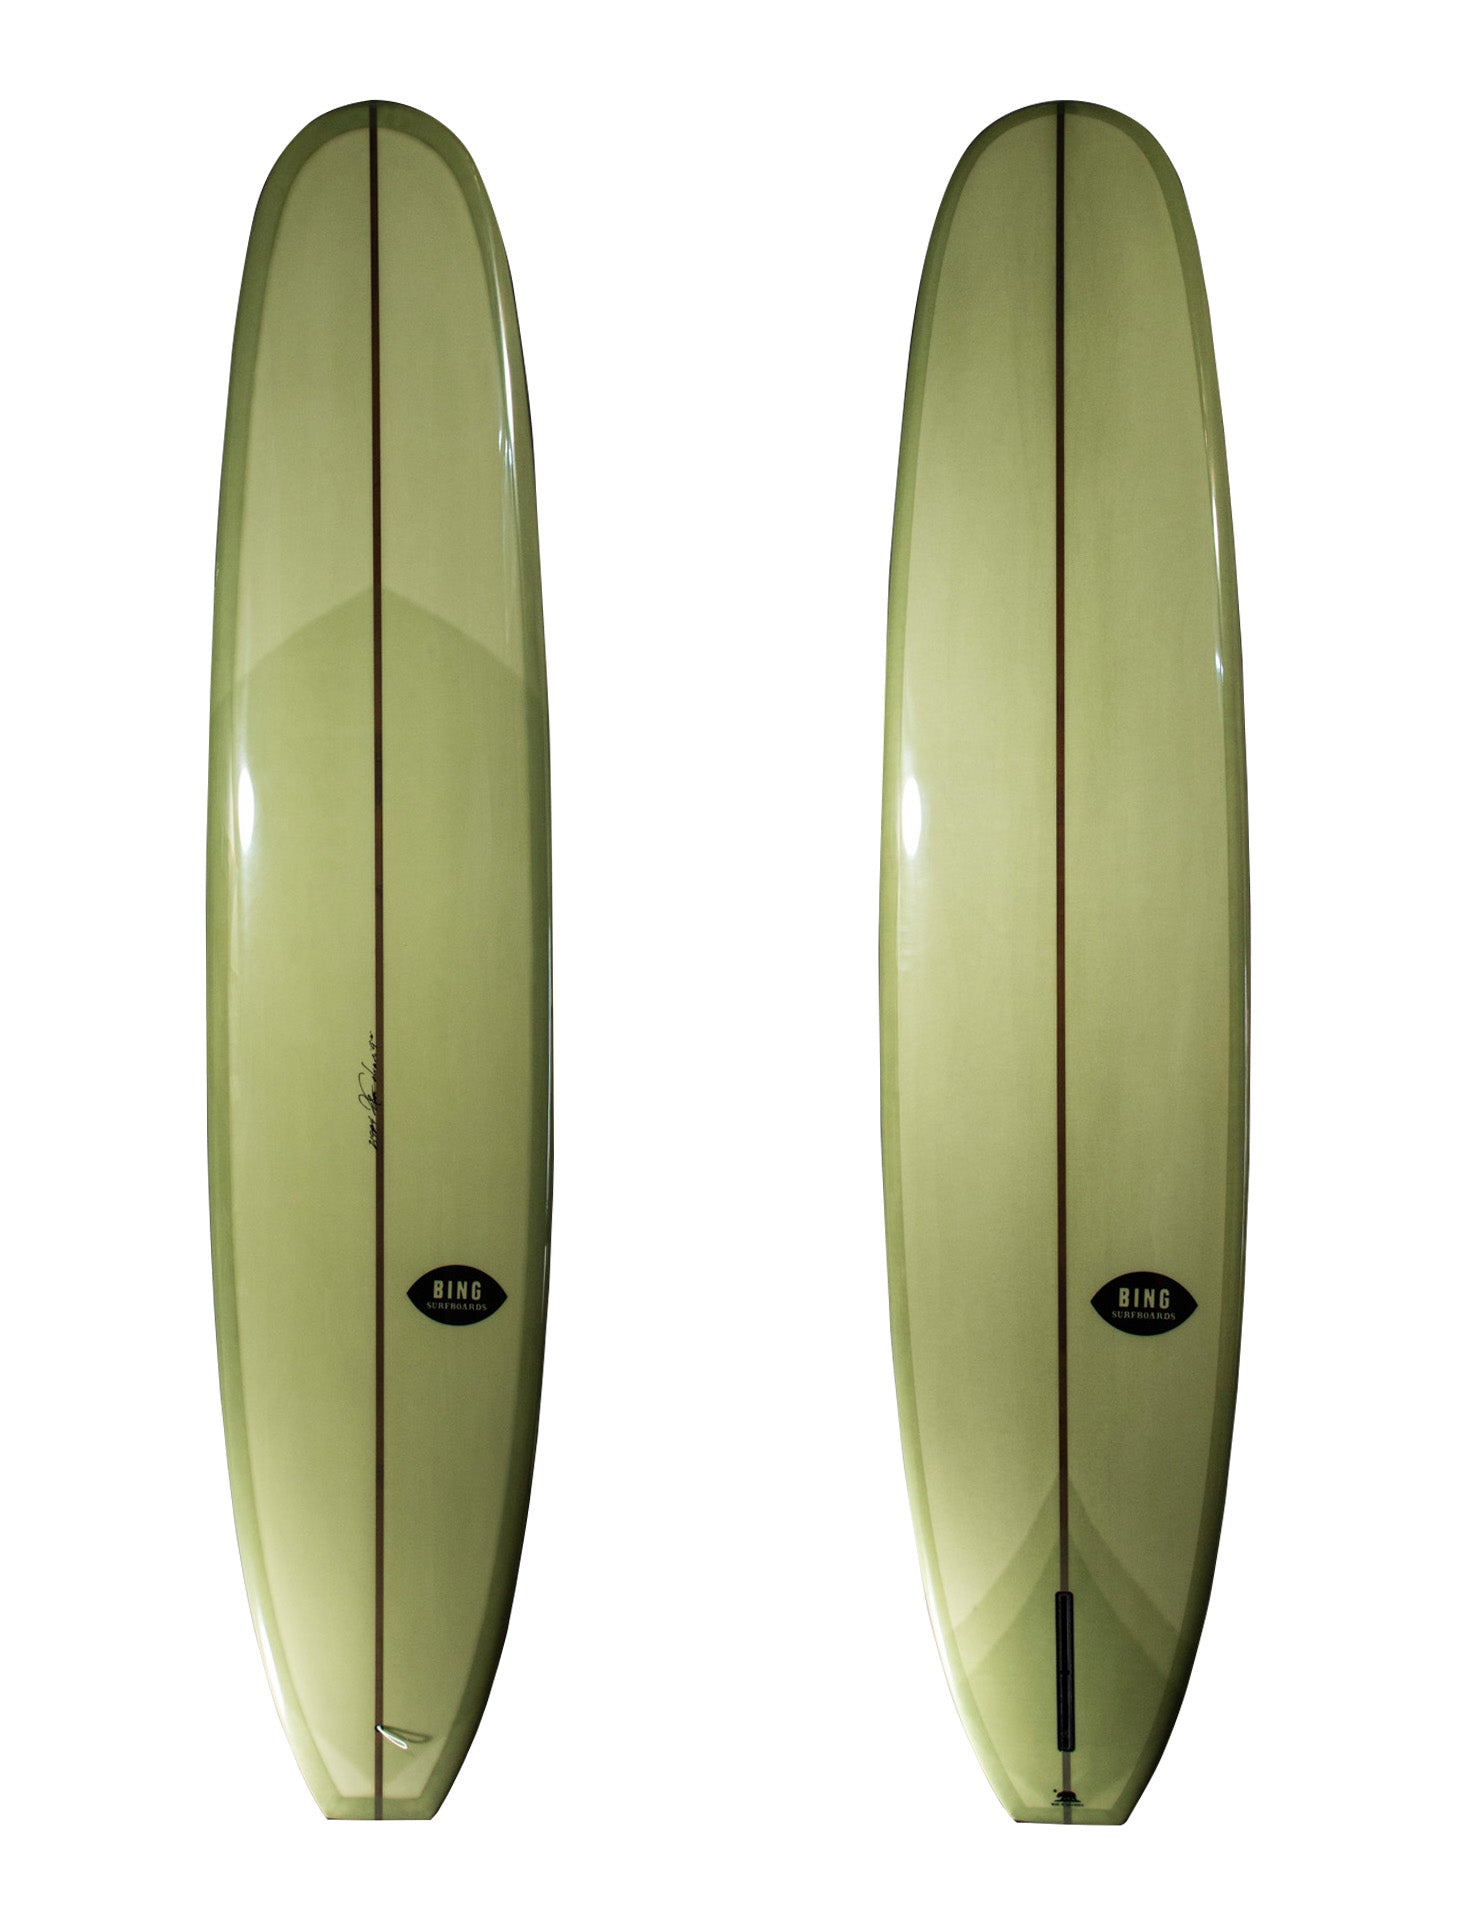 Collections - Bing Surfboards